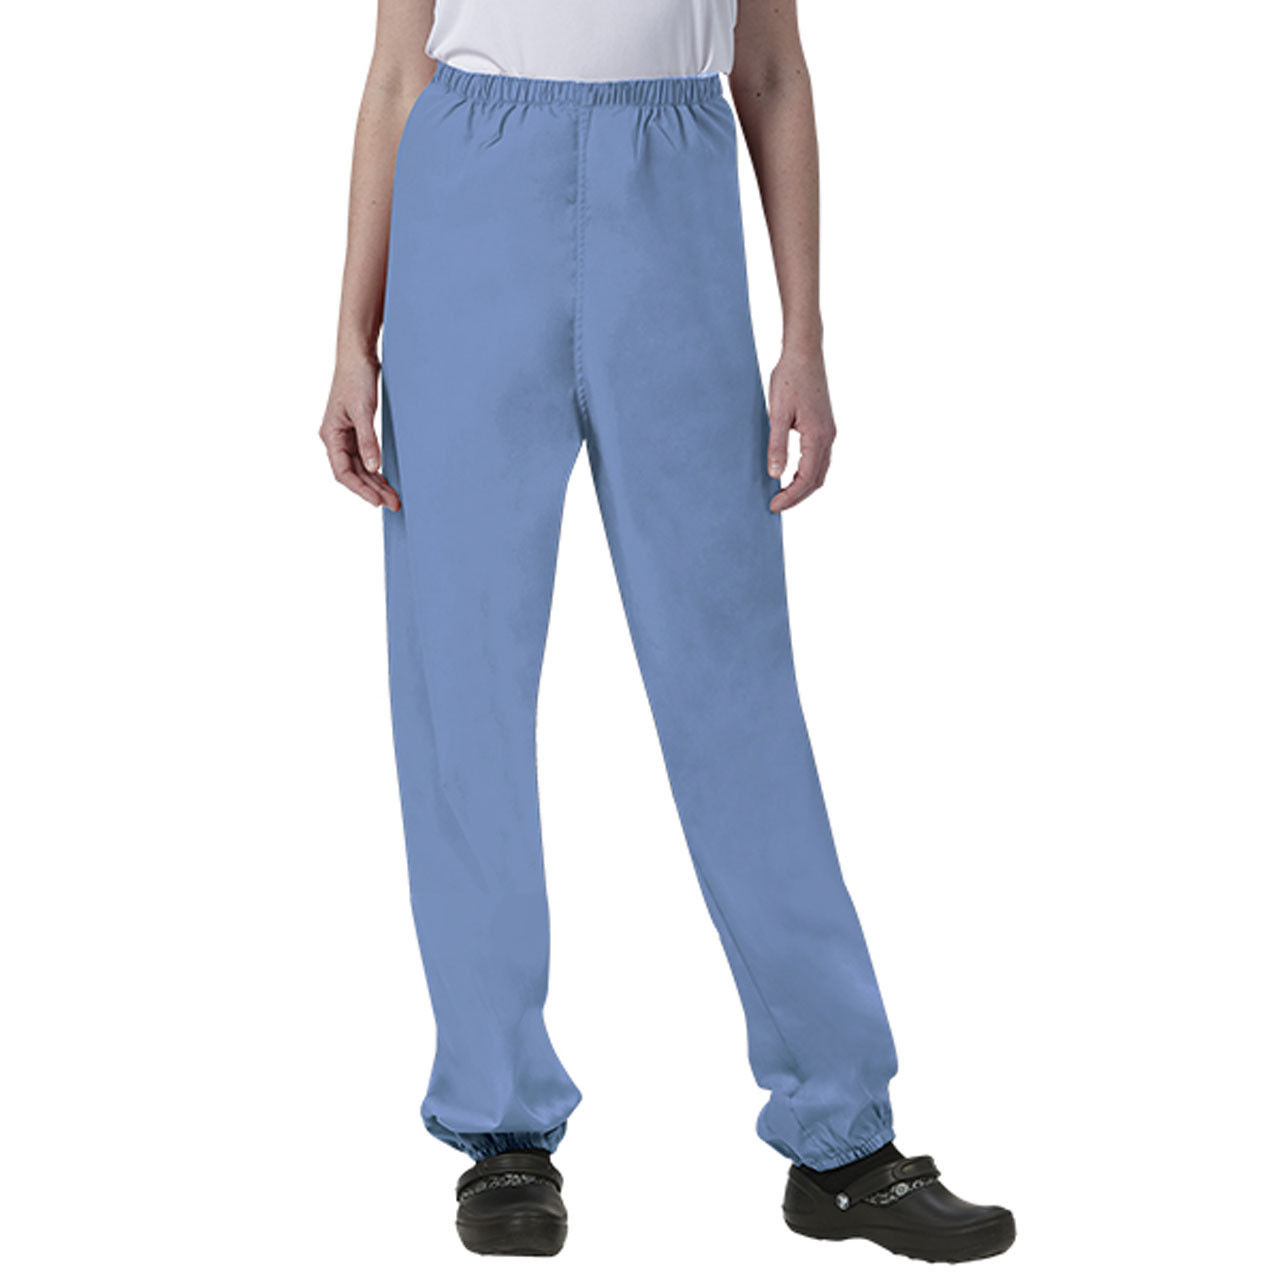 Are these scrub pants with polyester elastic waistband wholesalers ideal for any facility?